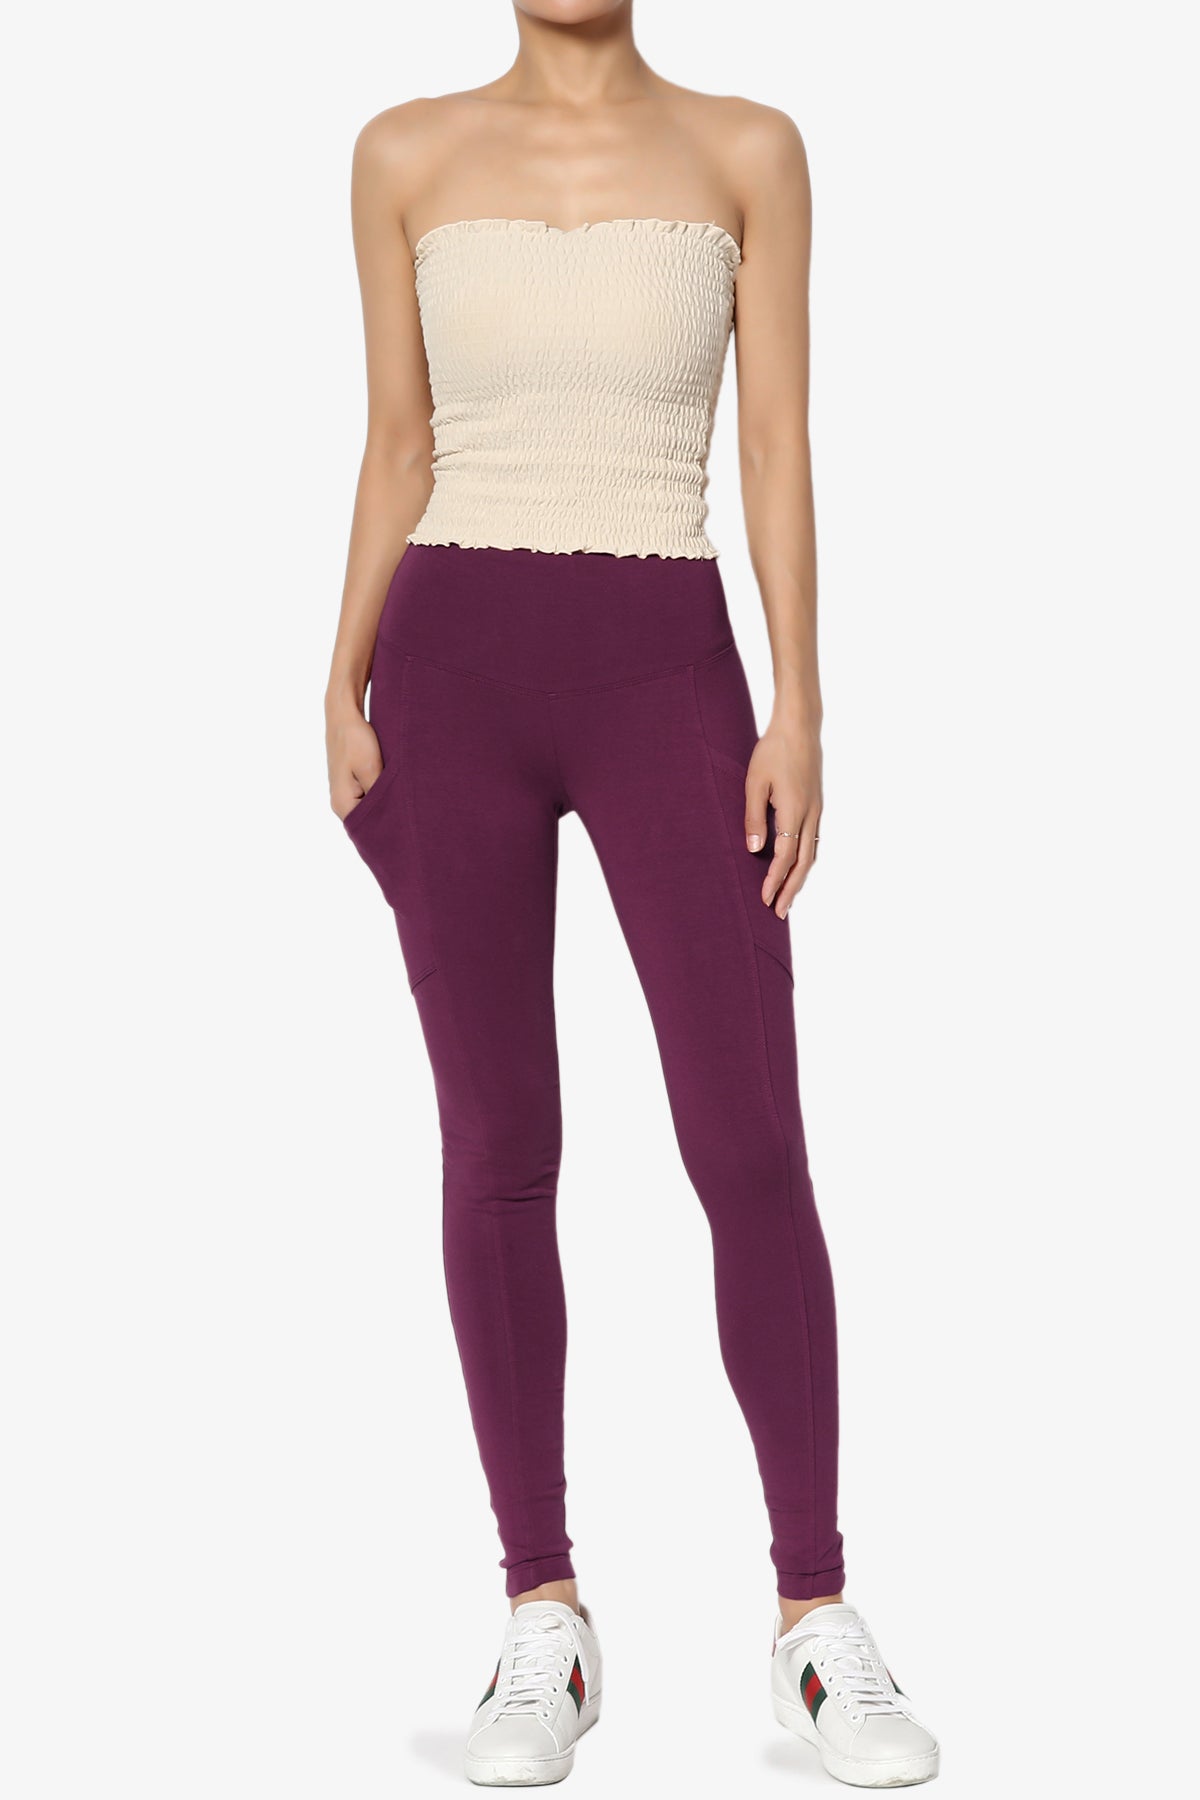 Load image into Gallery viewer, Ansley Luxe Cotton Leggings with Pockets DARK PLUM_6
